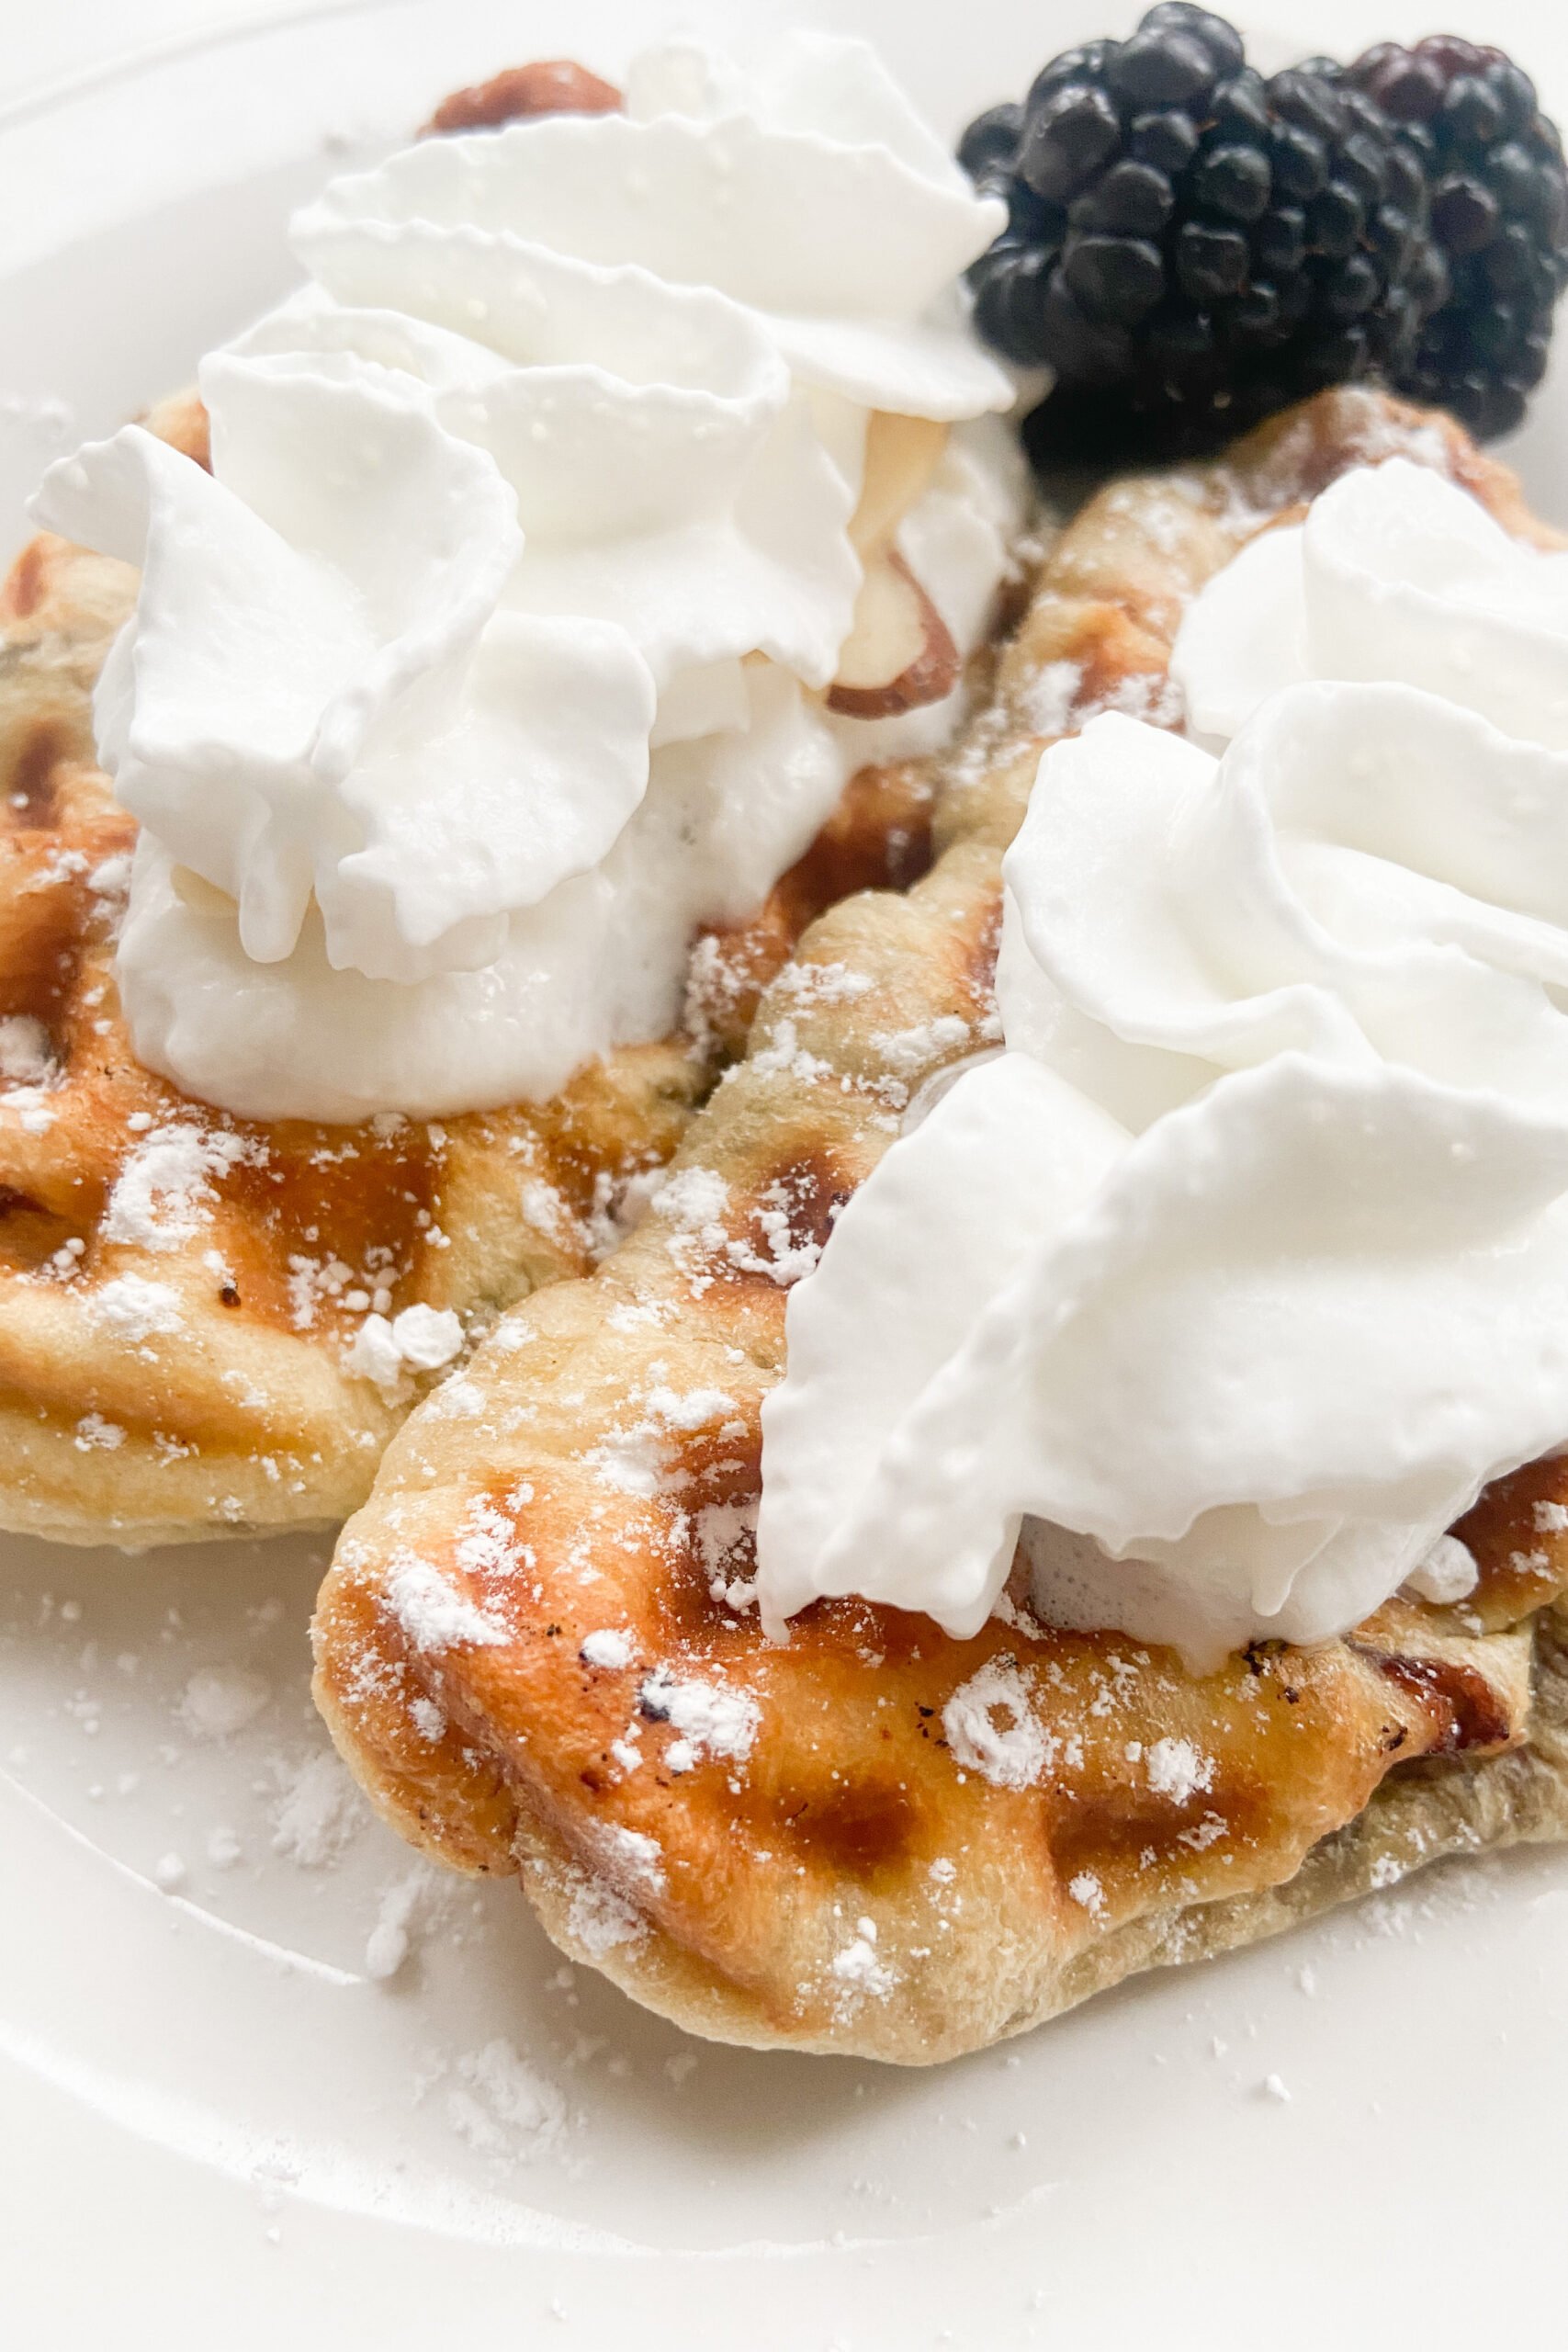 Croffles topped with whipped cream and powdered sugar.